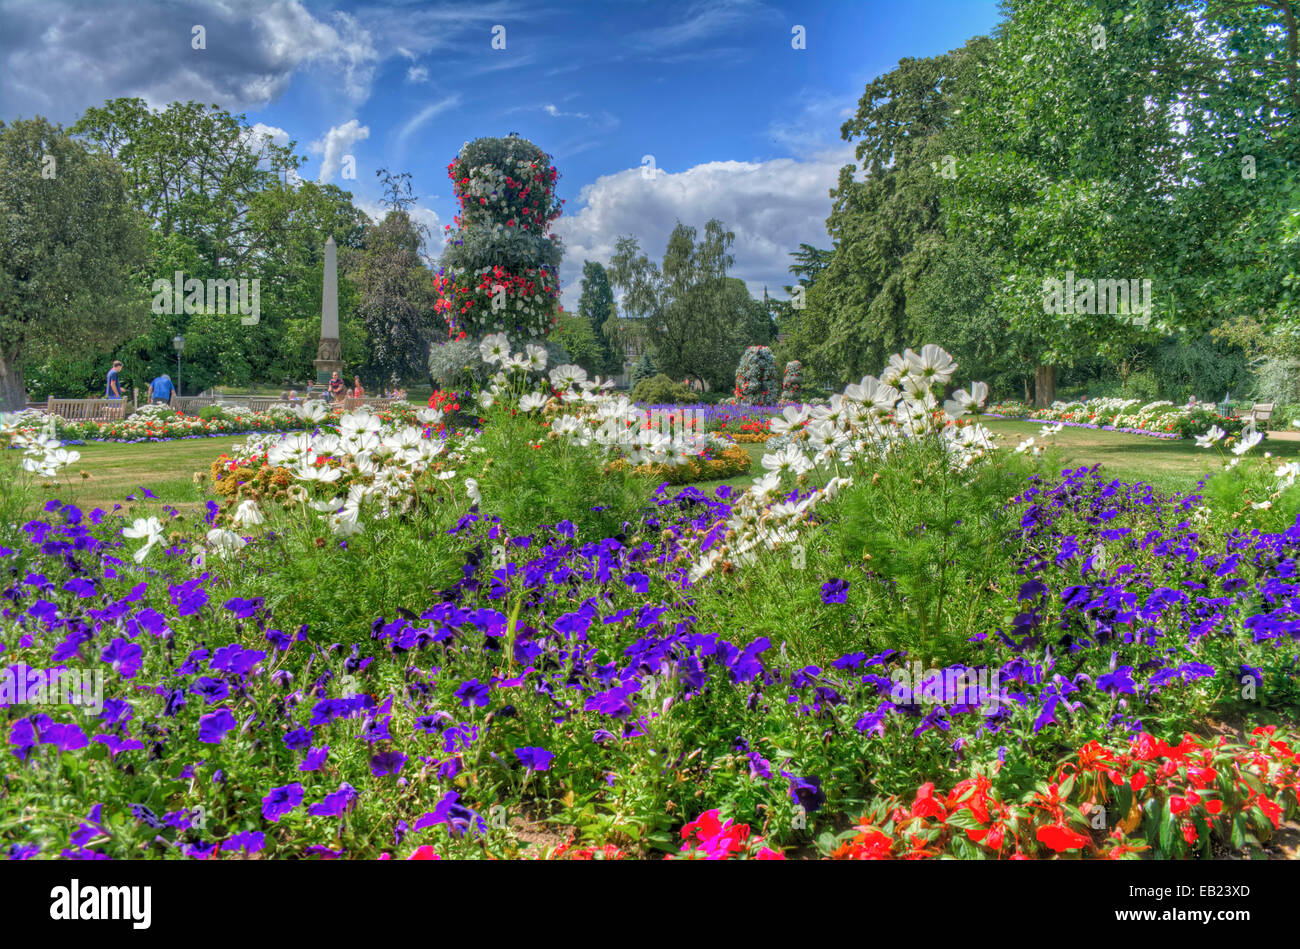 HDR of Floral display at the Jephson Gardens, formal gardens in Royal Leamington Spa, Warwickshire, England, UK Stock Photo